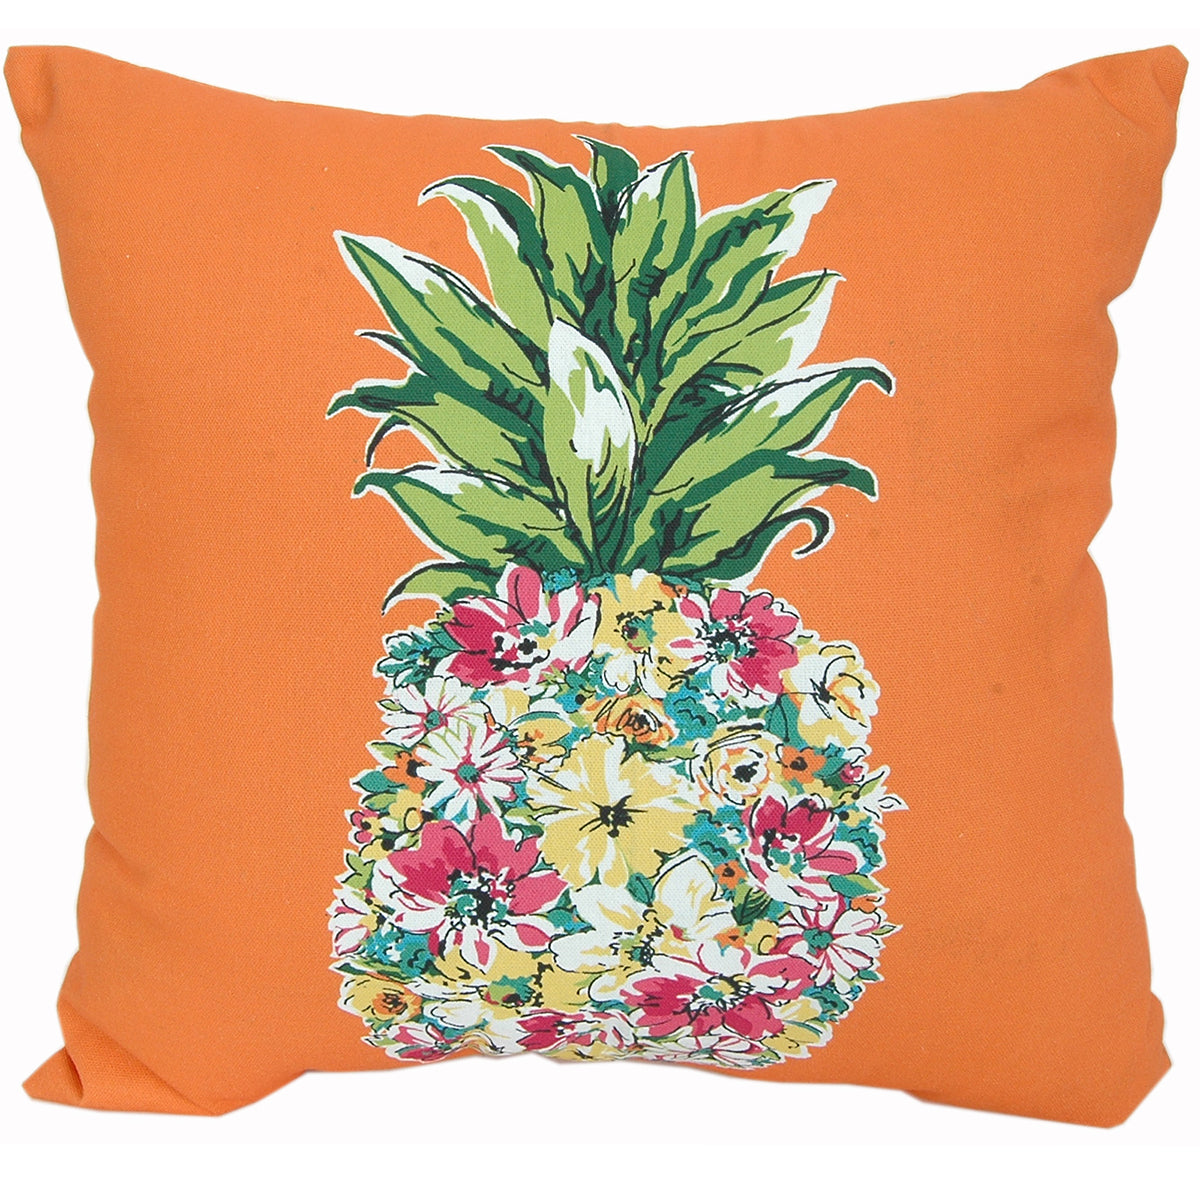 Pillow 16" Sq Floral Pineapple